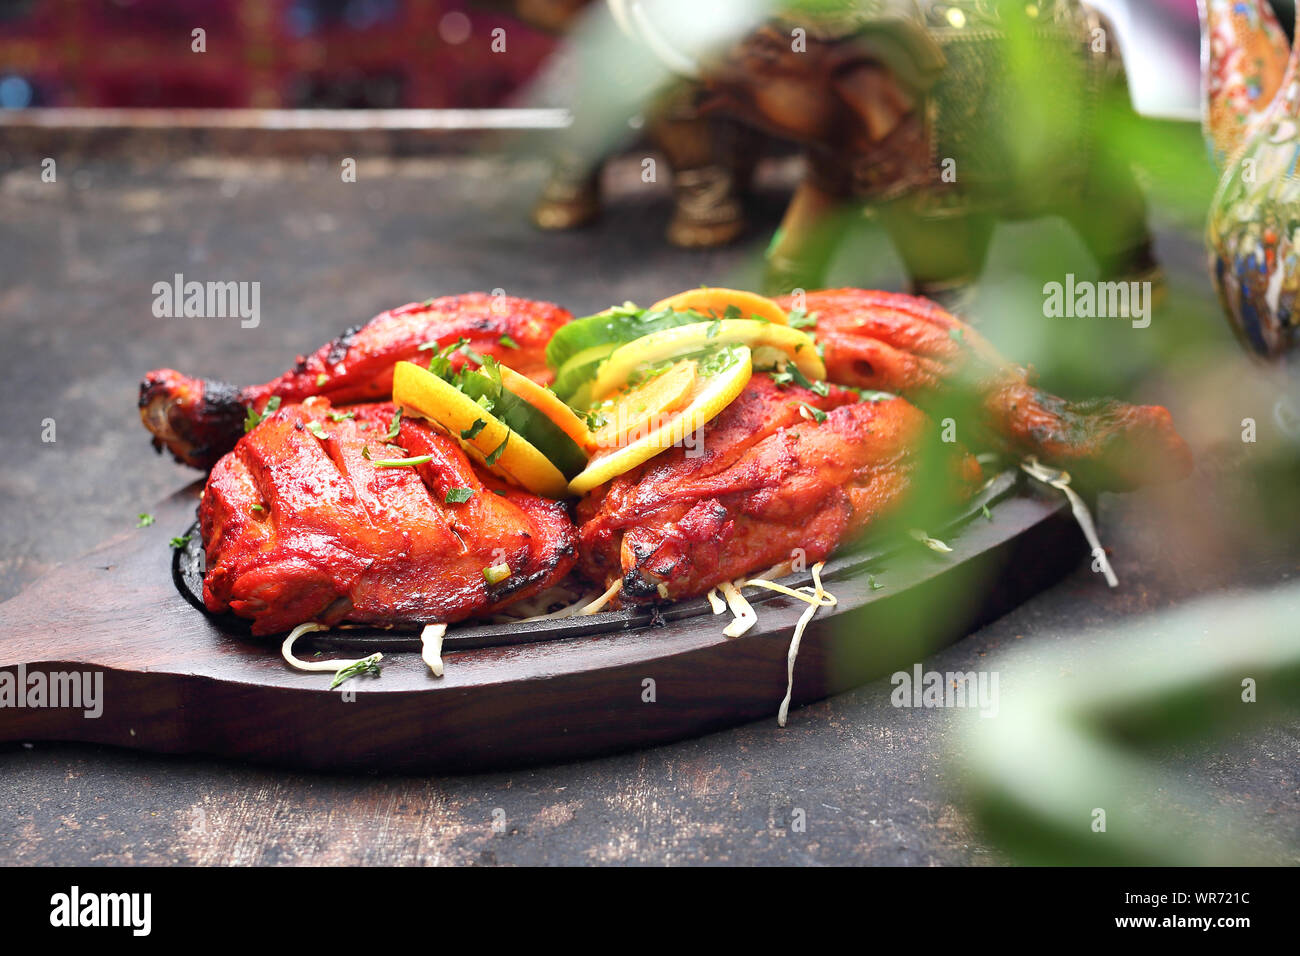 Eastern cuisine. Thai style chicken. Aromatic colorful oriental cuisine. Stock Photo